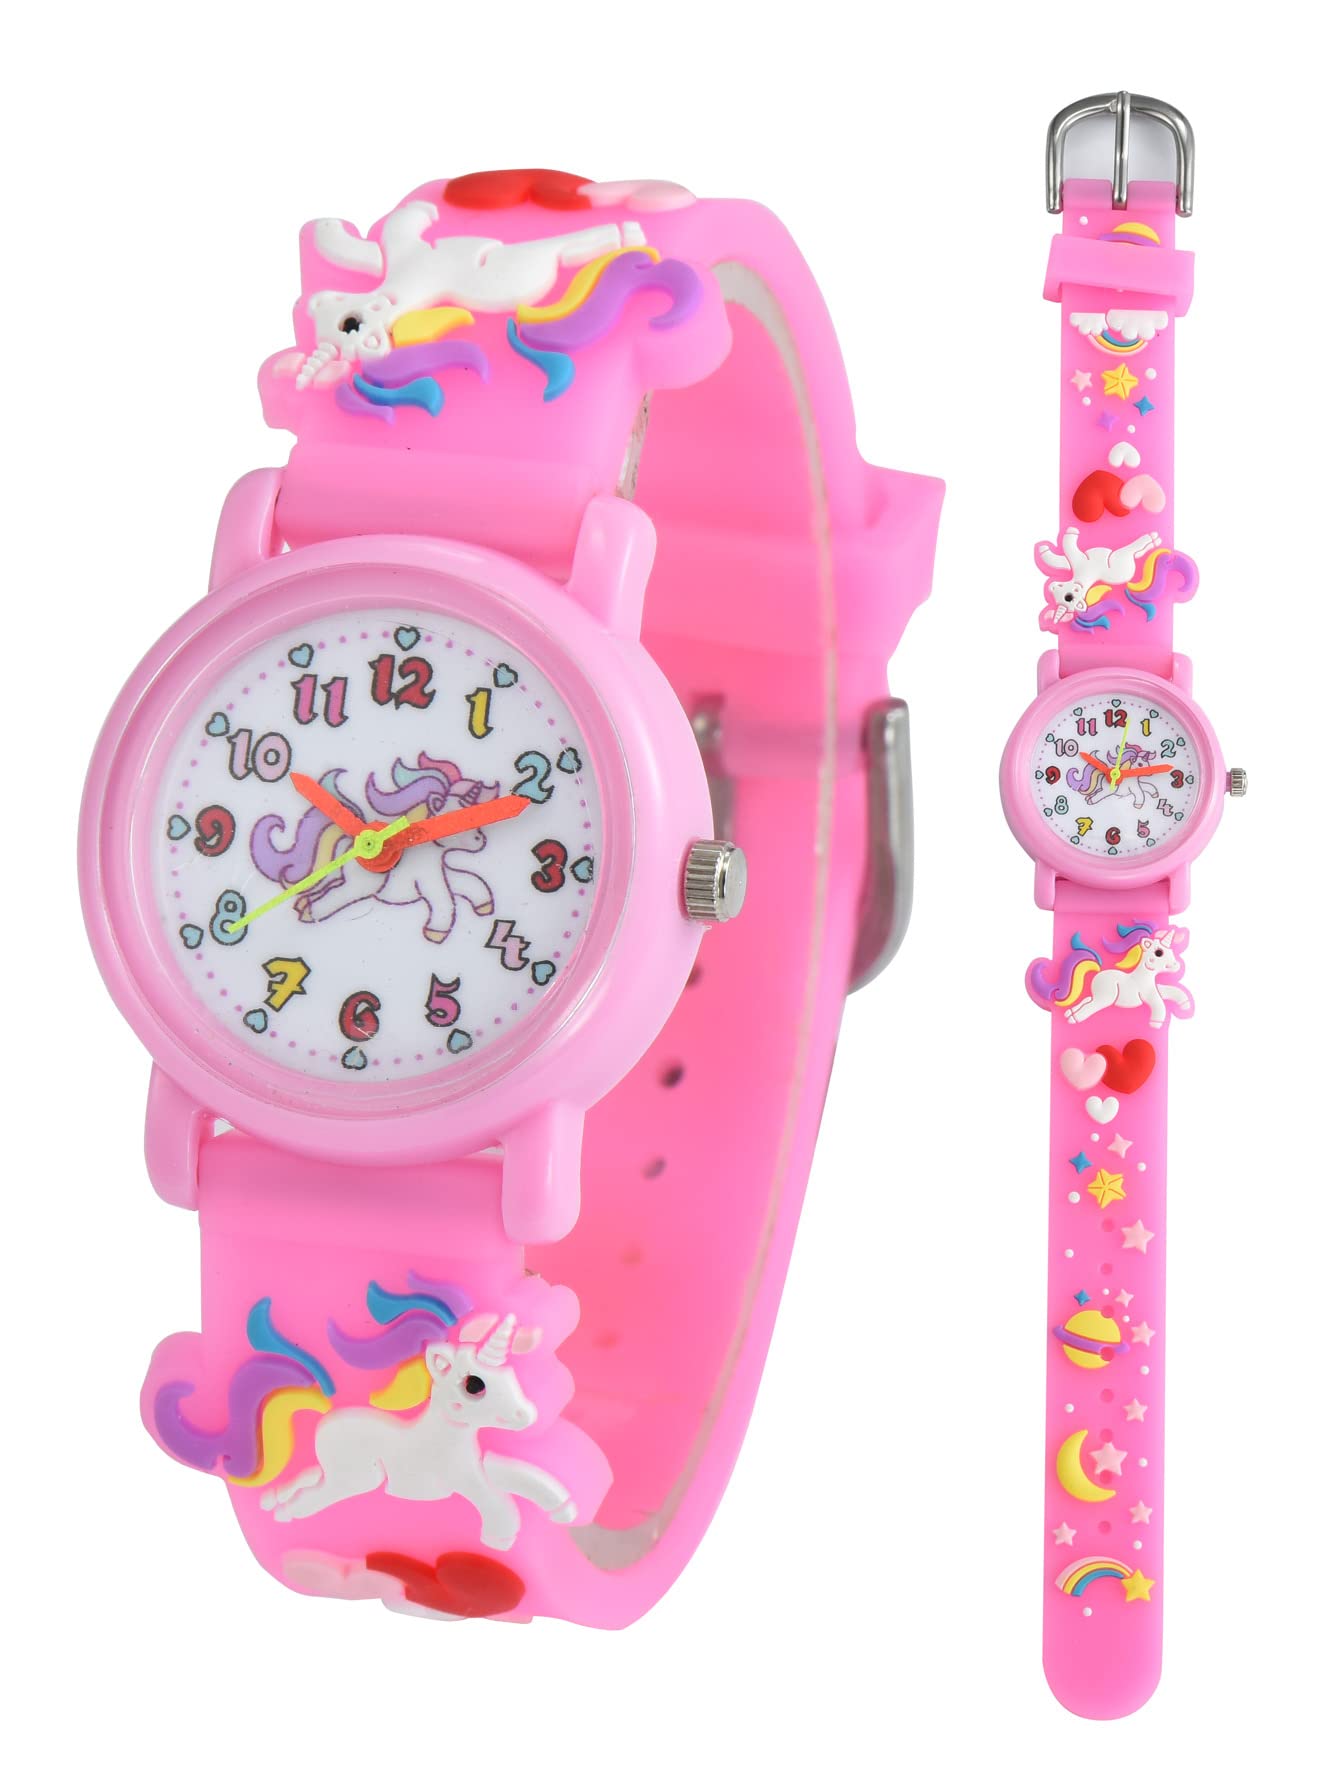 Childs love Girls Watches Kids Watches 3D Cartoon Daily Using Waterproof Watches for Girls Gifts for Girls Ages 3-12 Toys...